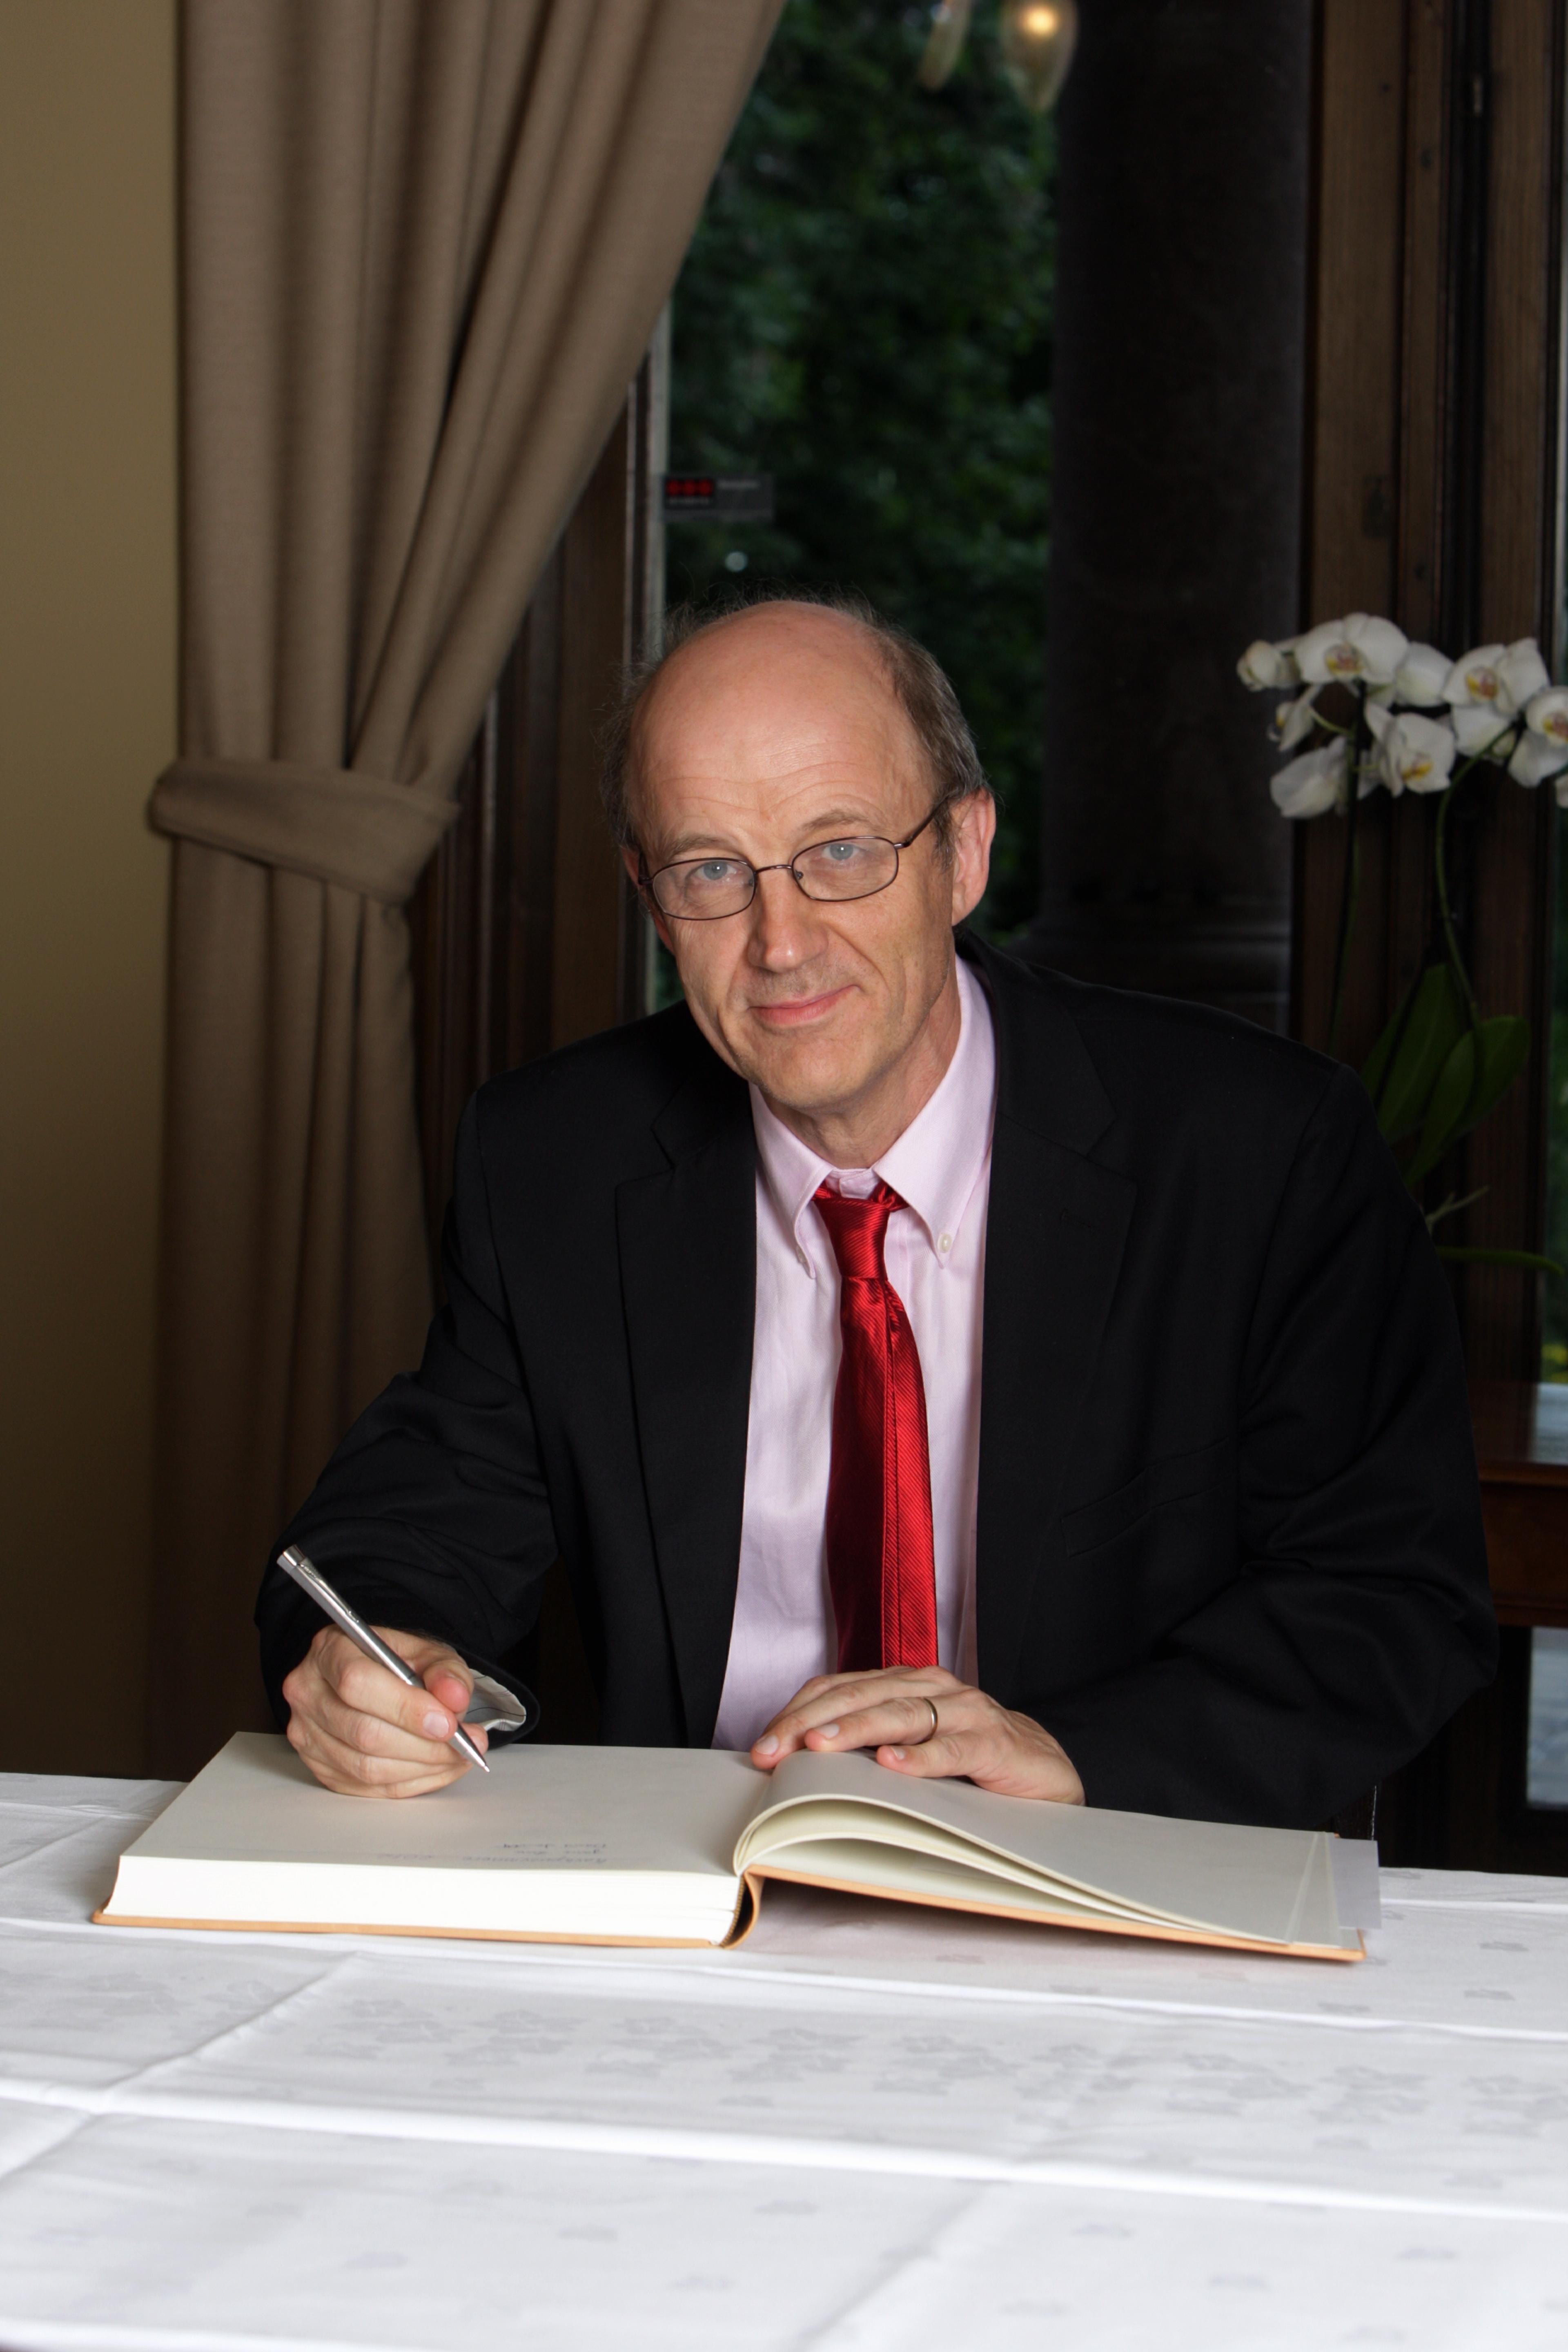 David C. Jewitt signing the guest book at the Norwegian Academy of Science and Letters during the Kavli Prize week in Oslo